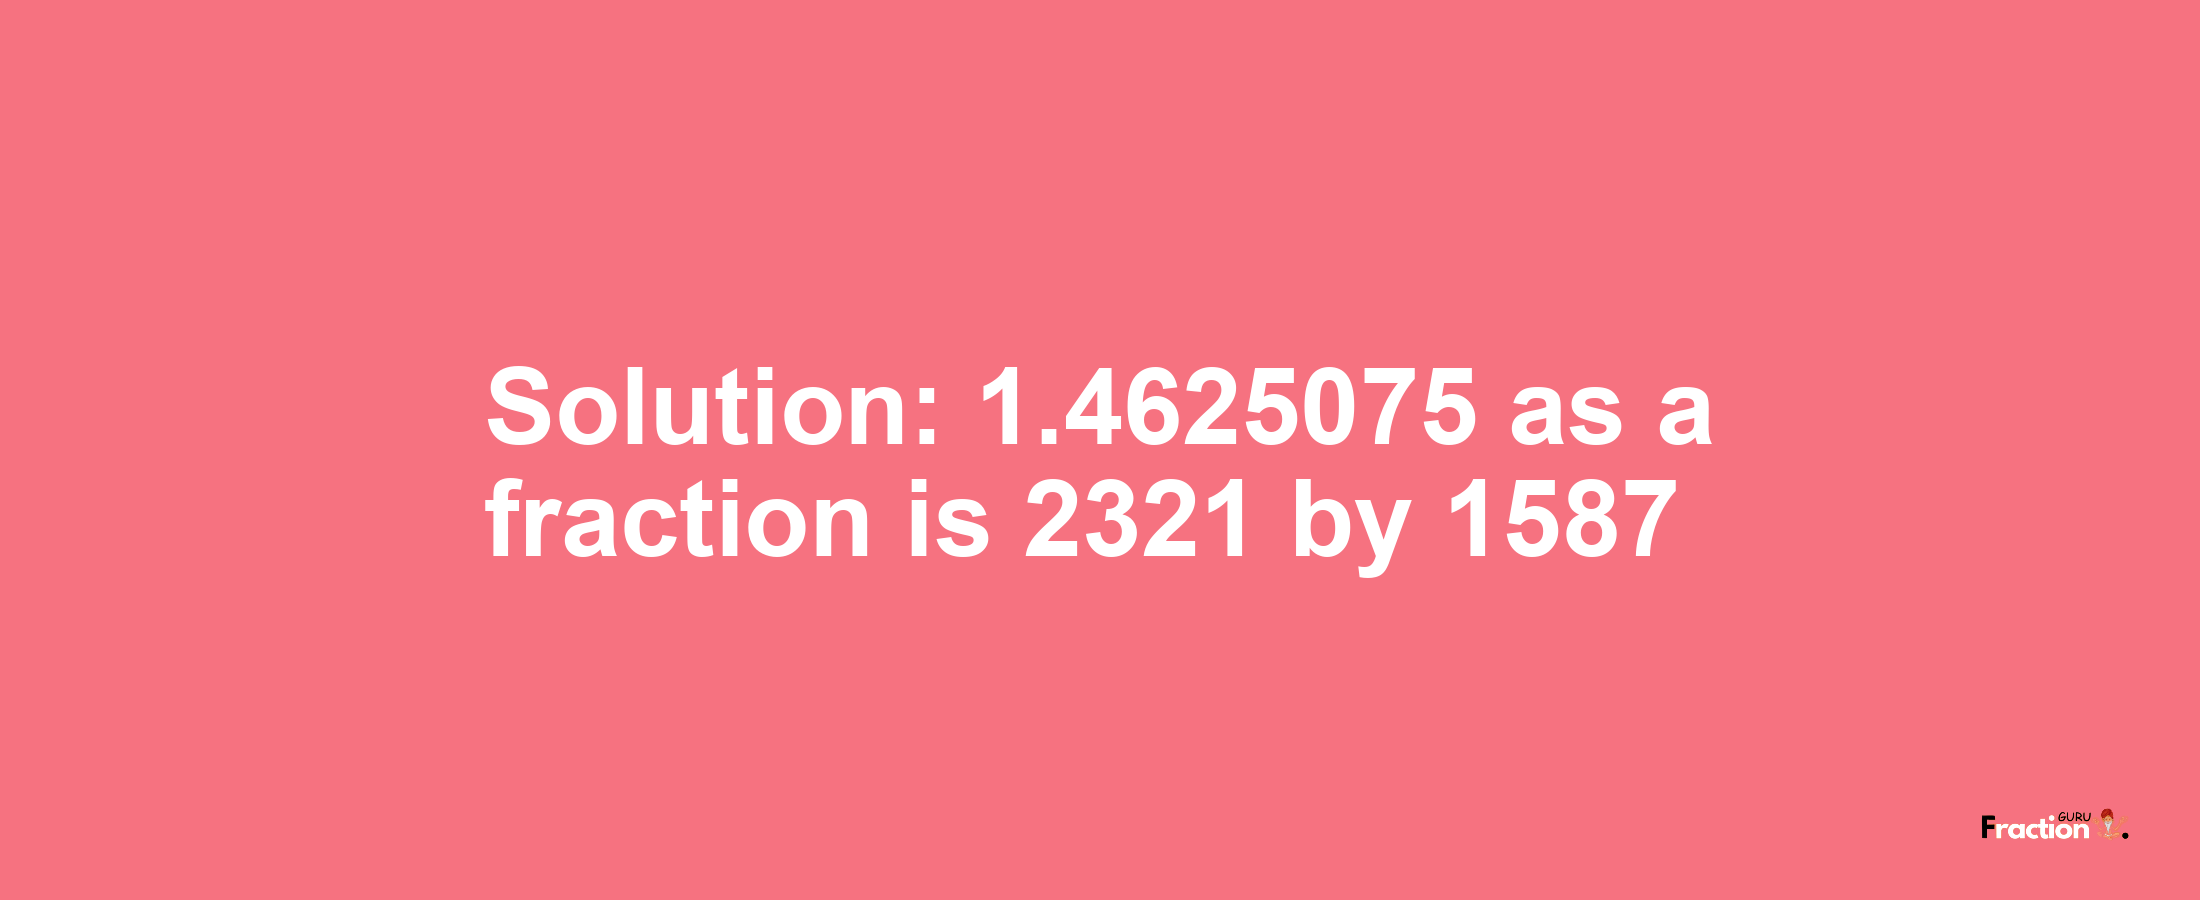 Solution:1.4625075 as a fraction is 2321/1587